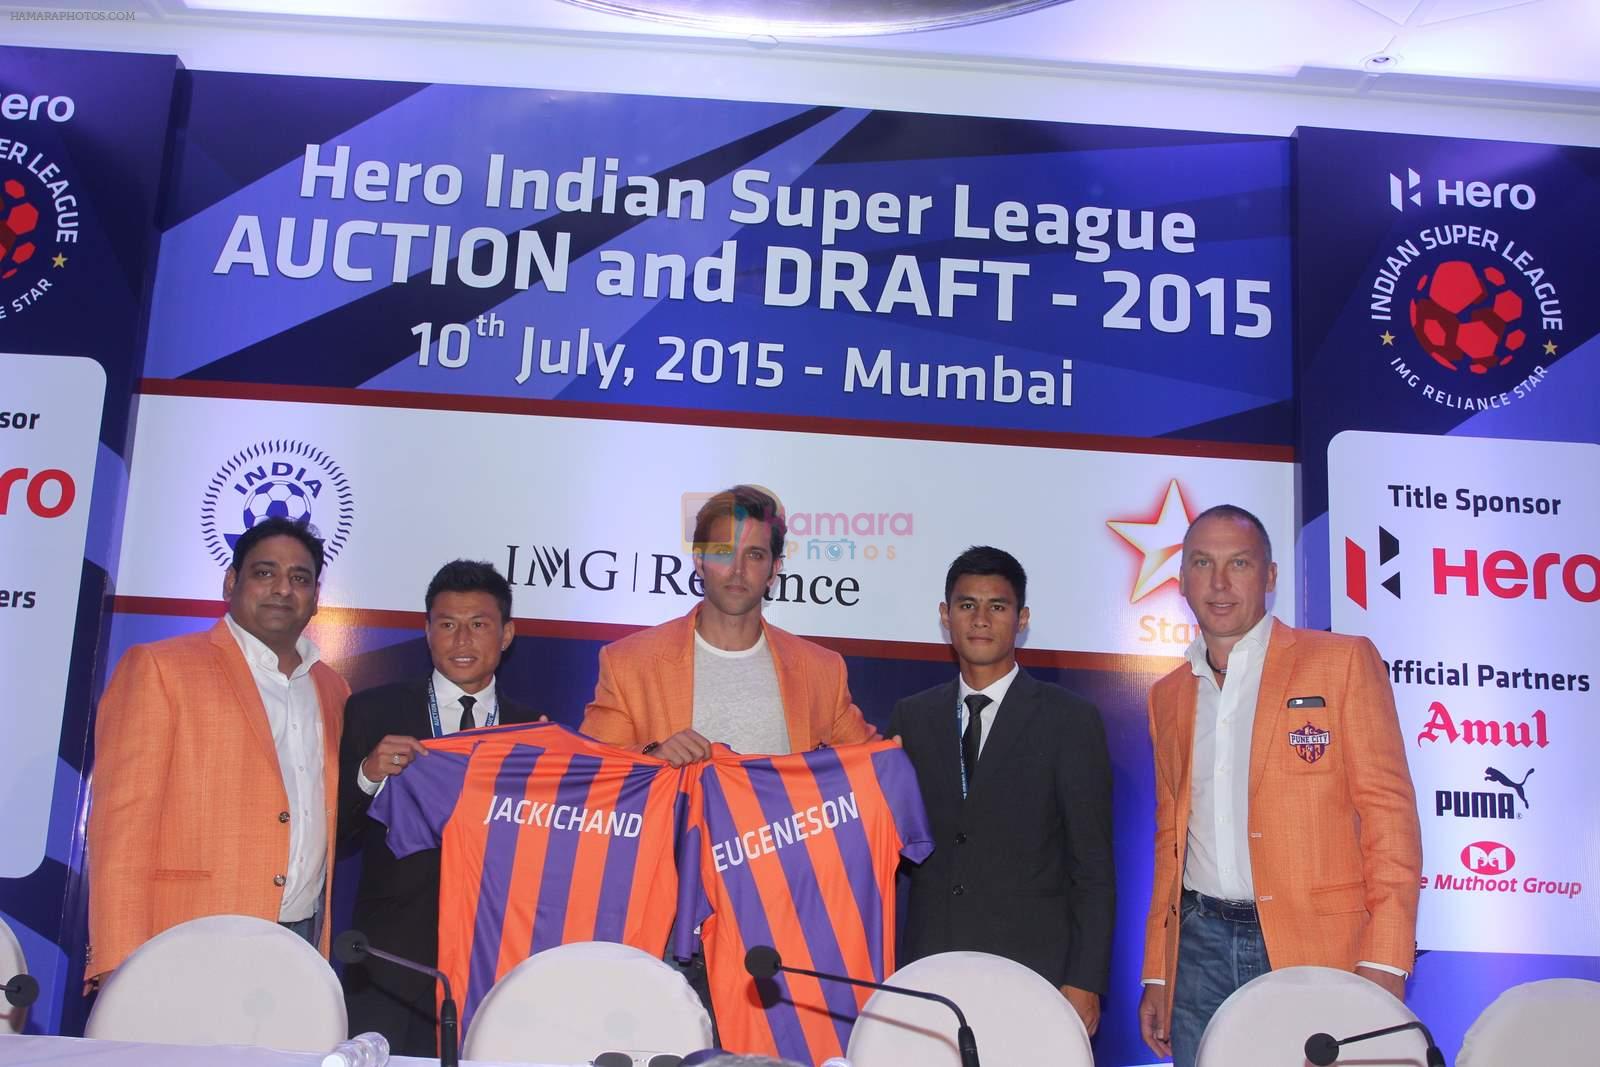 Hrithik Roshan snapped at Indian Super League auctions on 10th July 2015